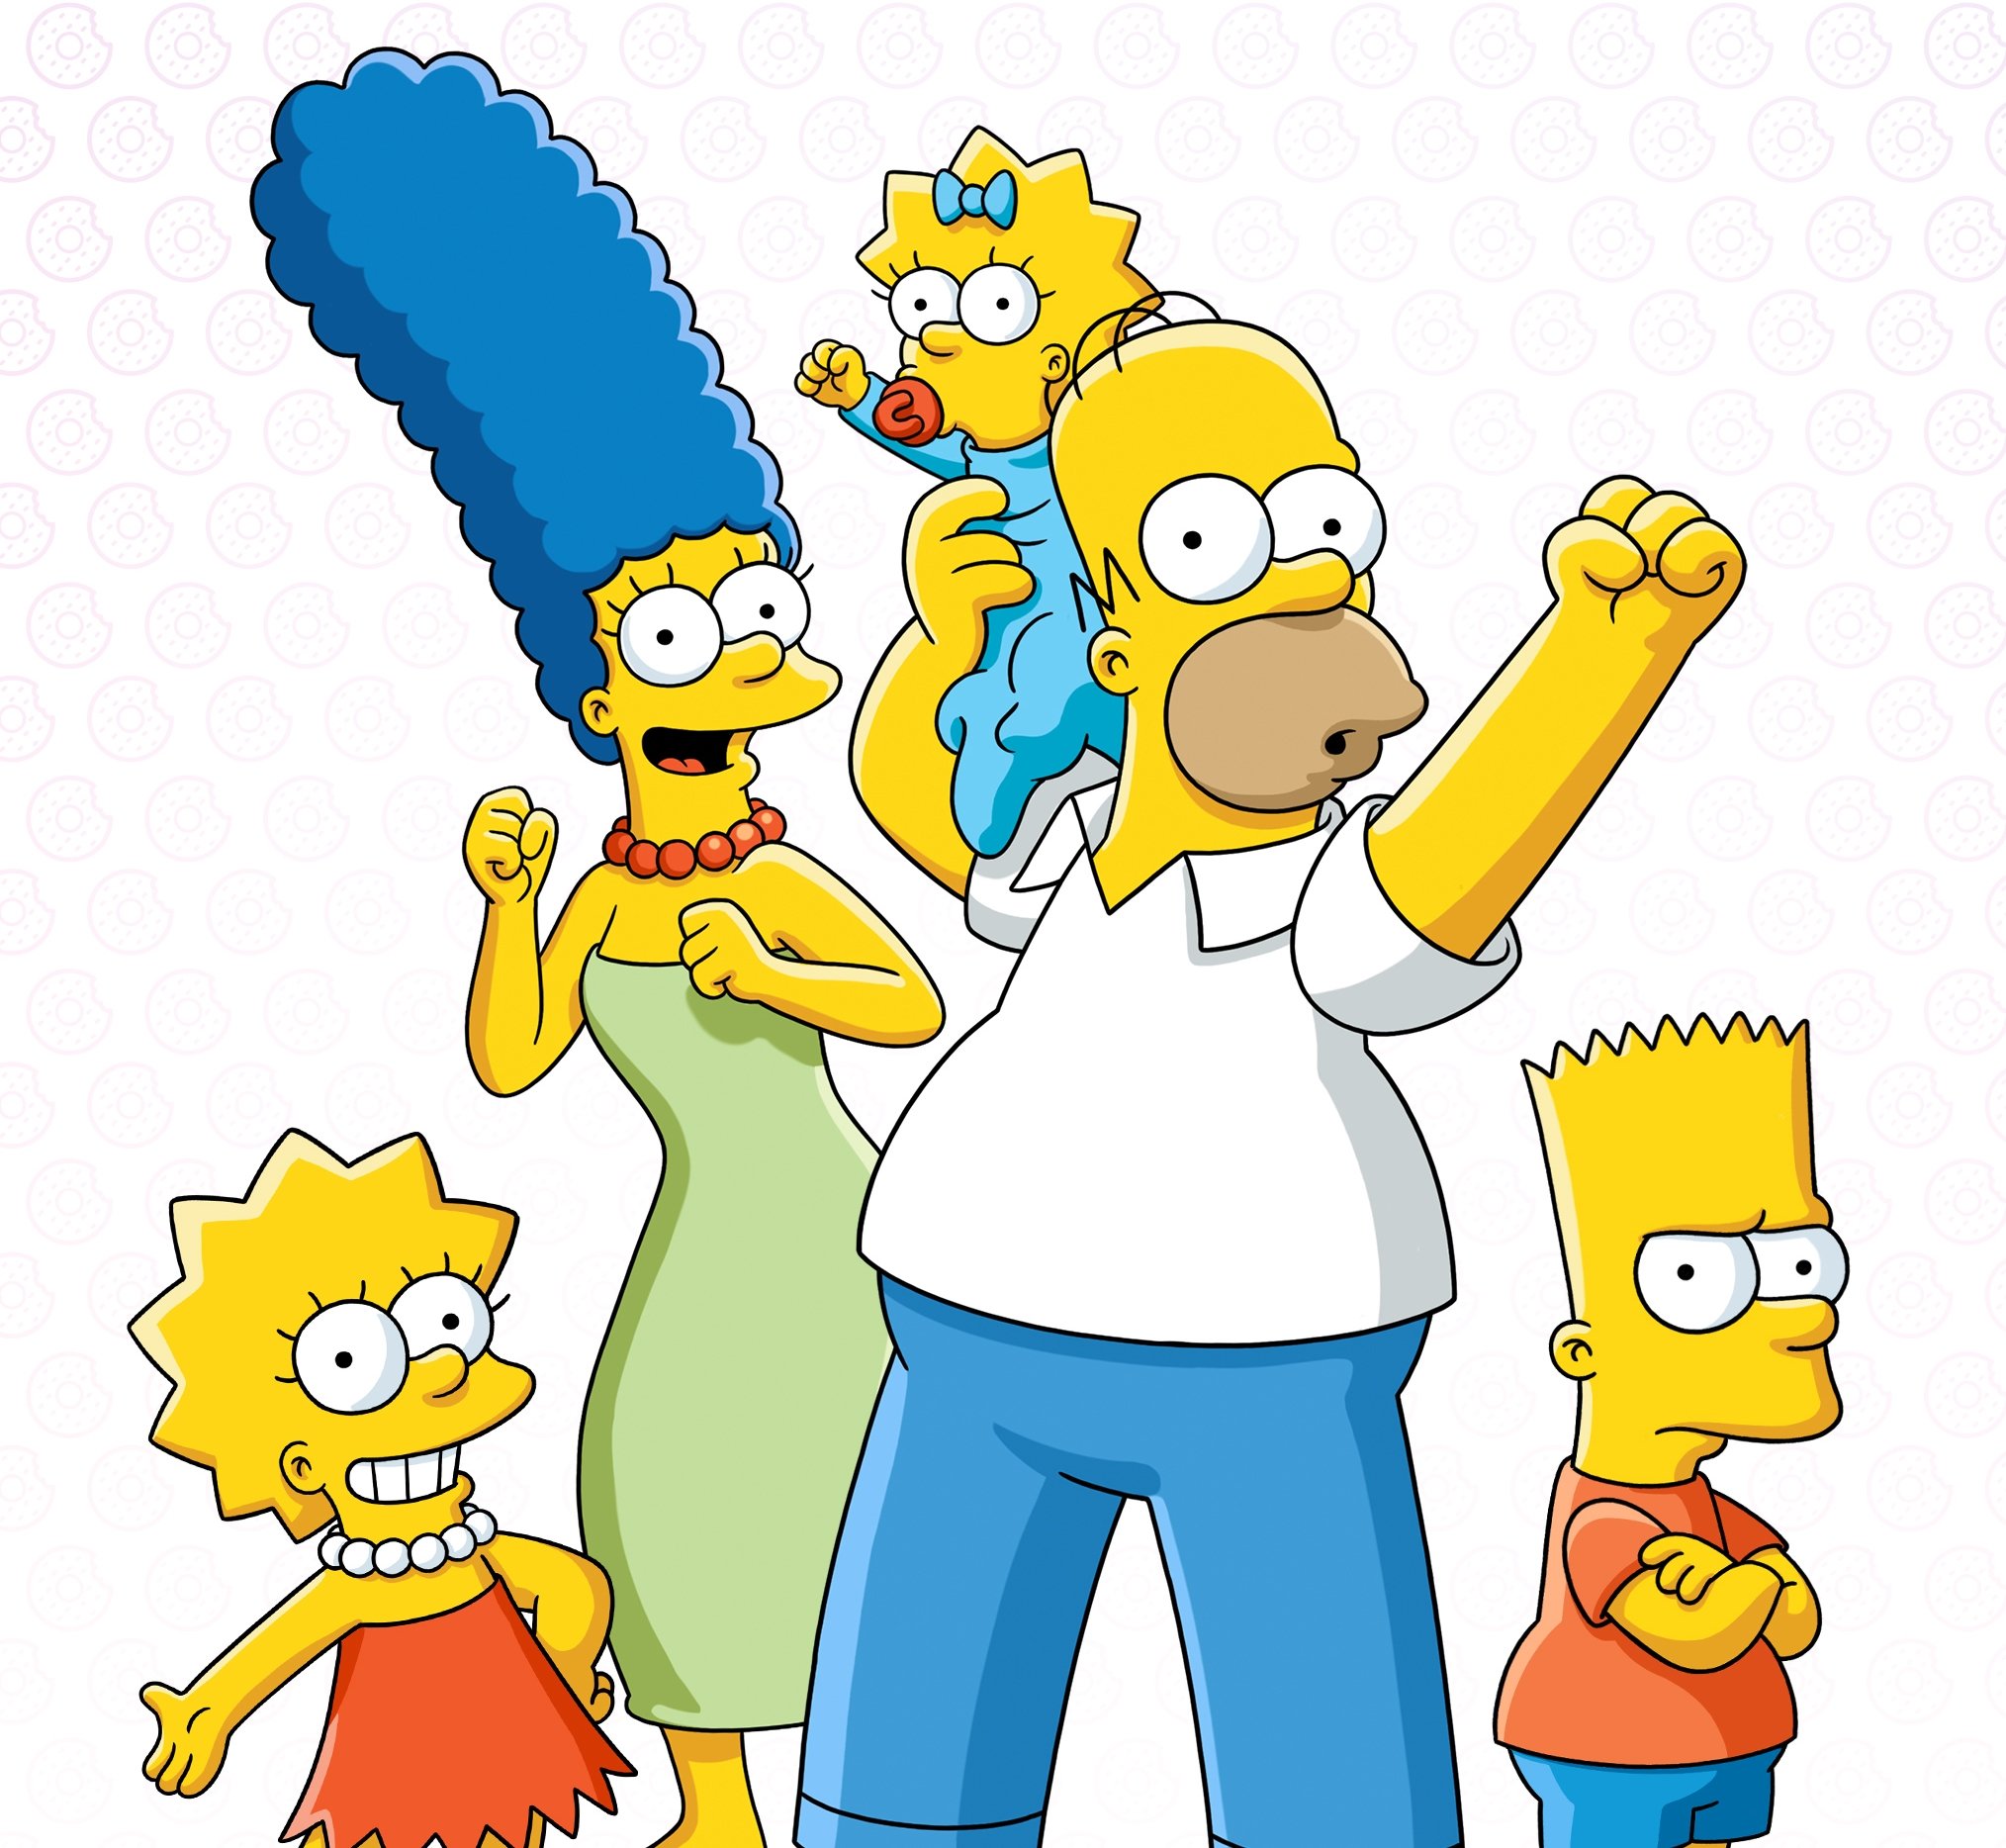 The Simpsons' Creator Is 'Still Proud' of This Controversial Character